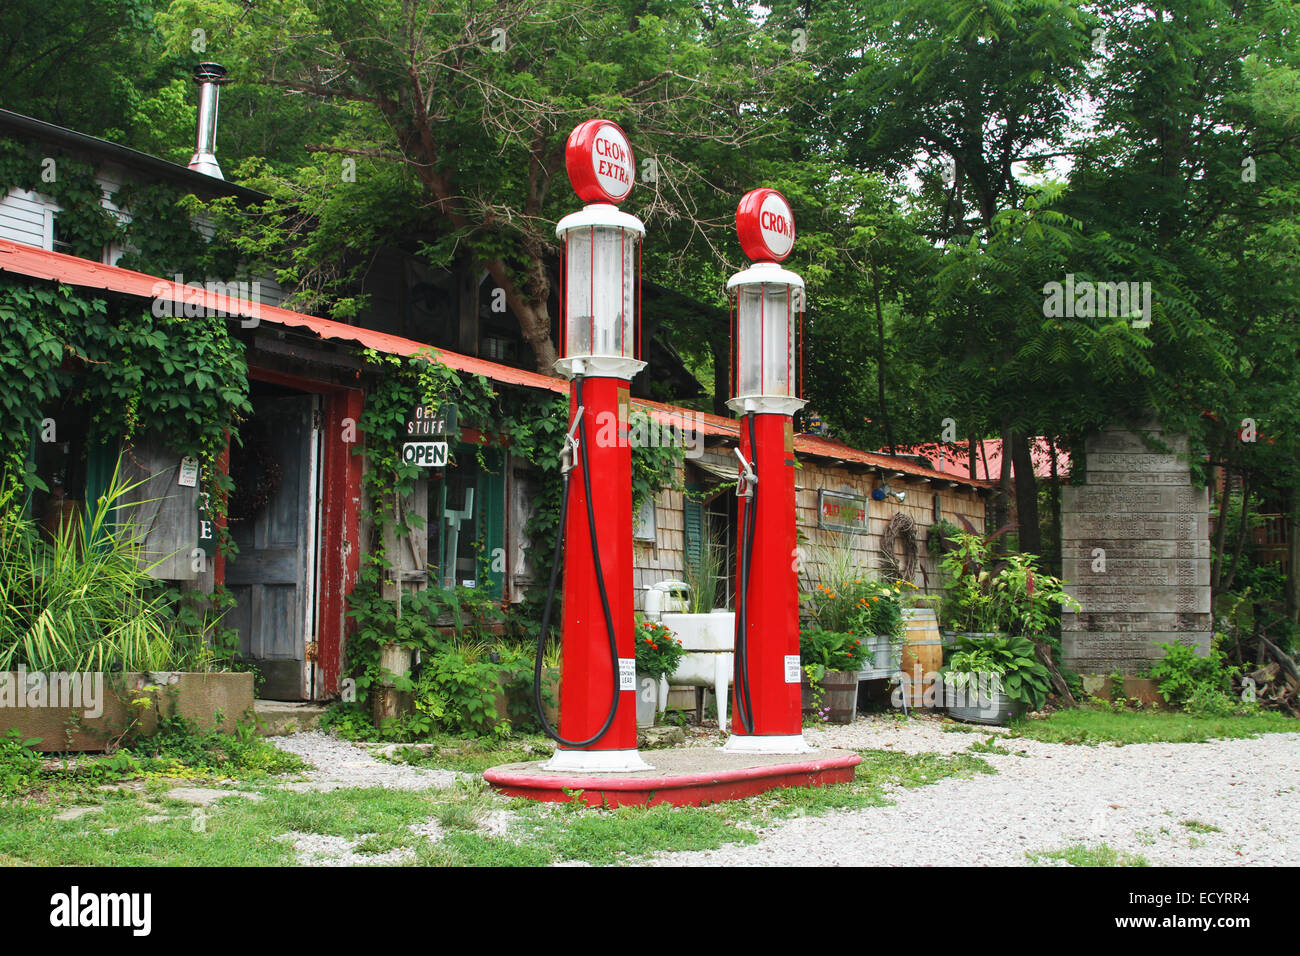 Gasoline Pumps outside the Old Stuff Antique store. Gasoline pumps are identified as Benkin Pumps. Rabbit Hash, Kentucky, USA. C Stock Photo